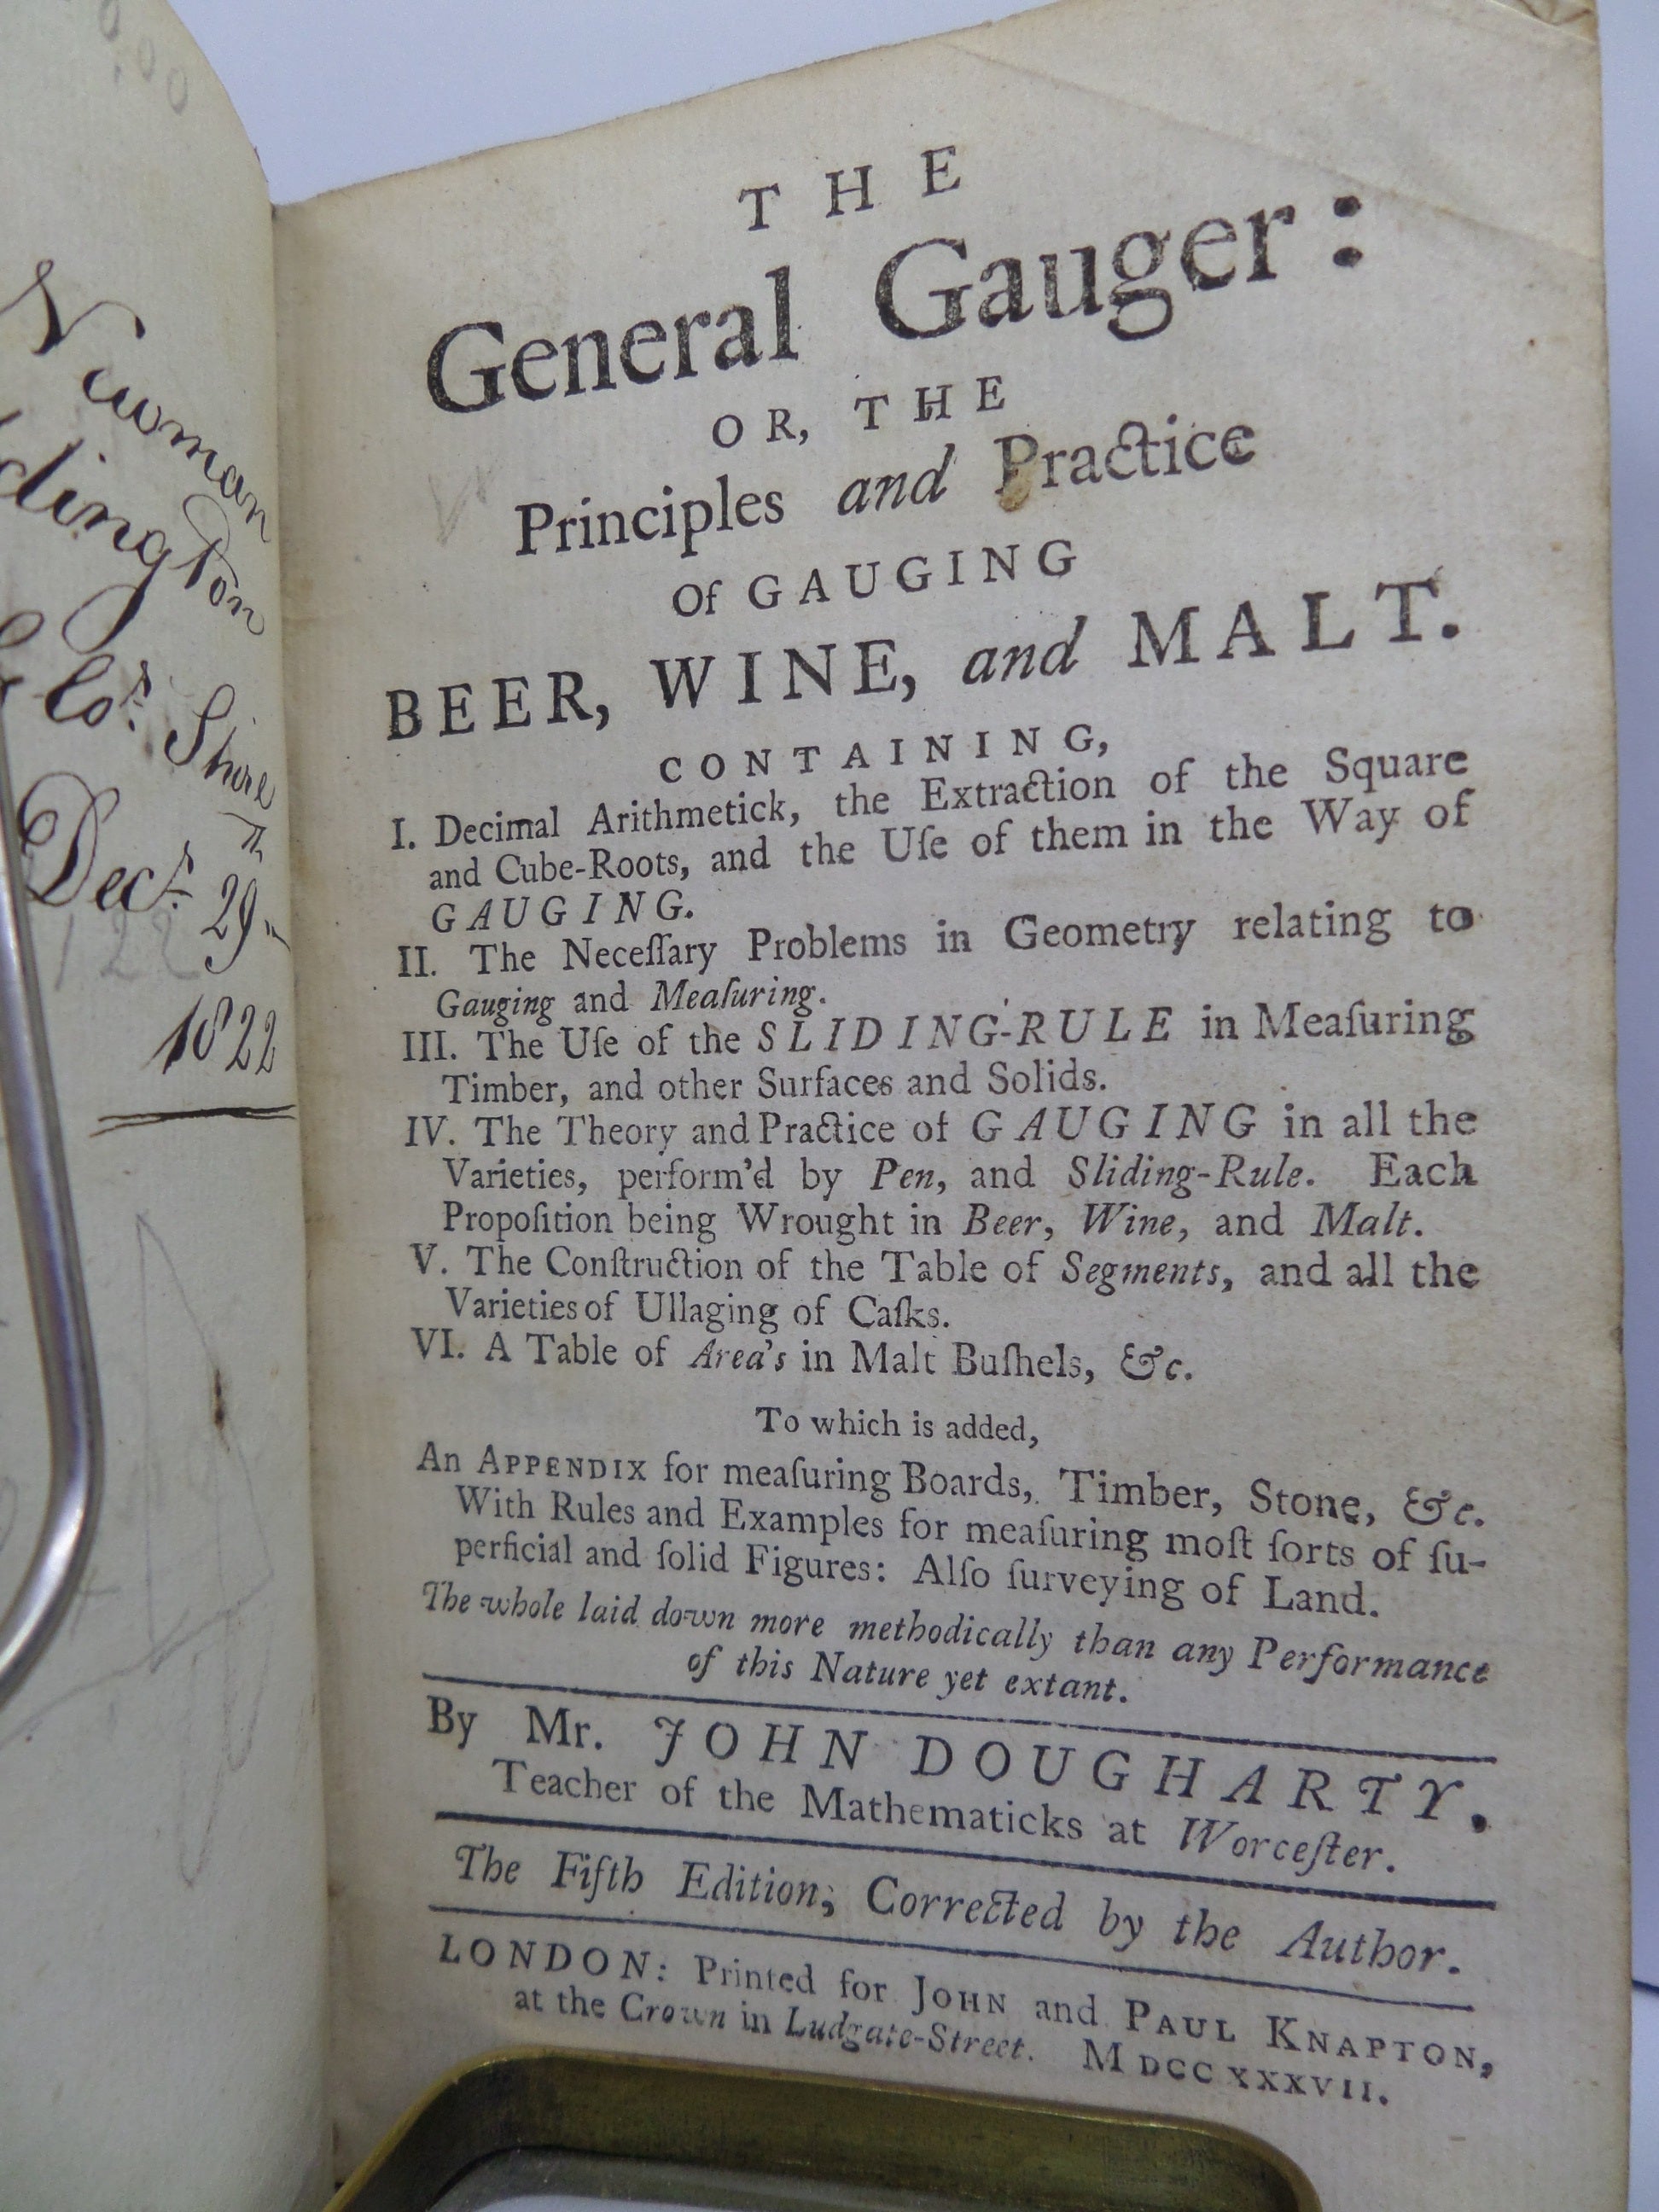 [BREWING] THE GENERAL GAUGER BY JOHN DOUGHARTY 1737 LEATHER-BOUND 5TH EDITION PRINCIPALS AND PRACTICE OF GAUGING BEER, WINE AND MALT